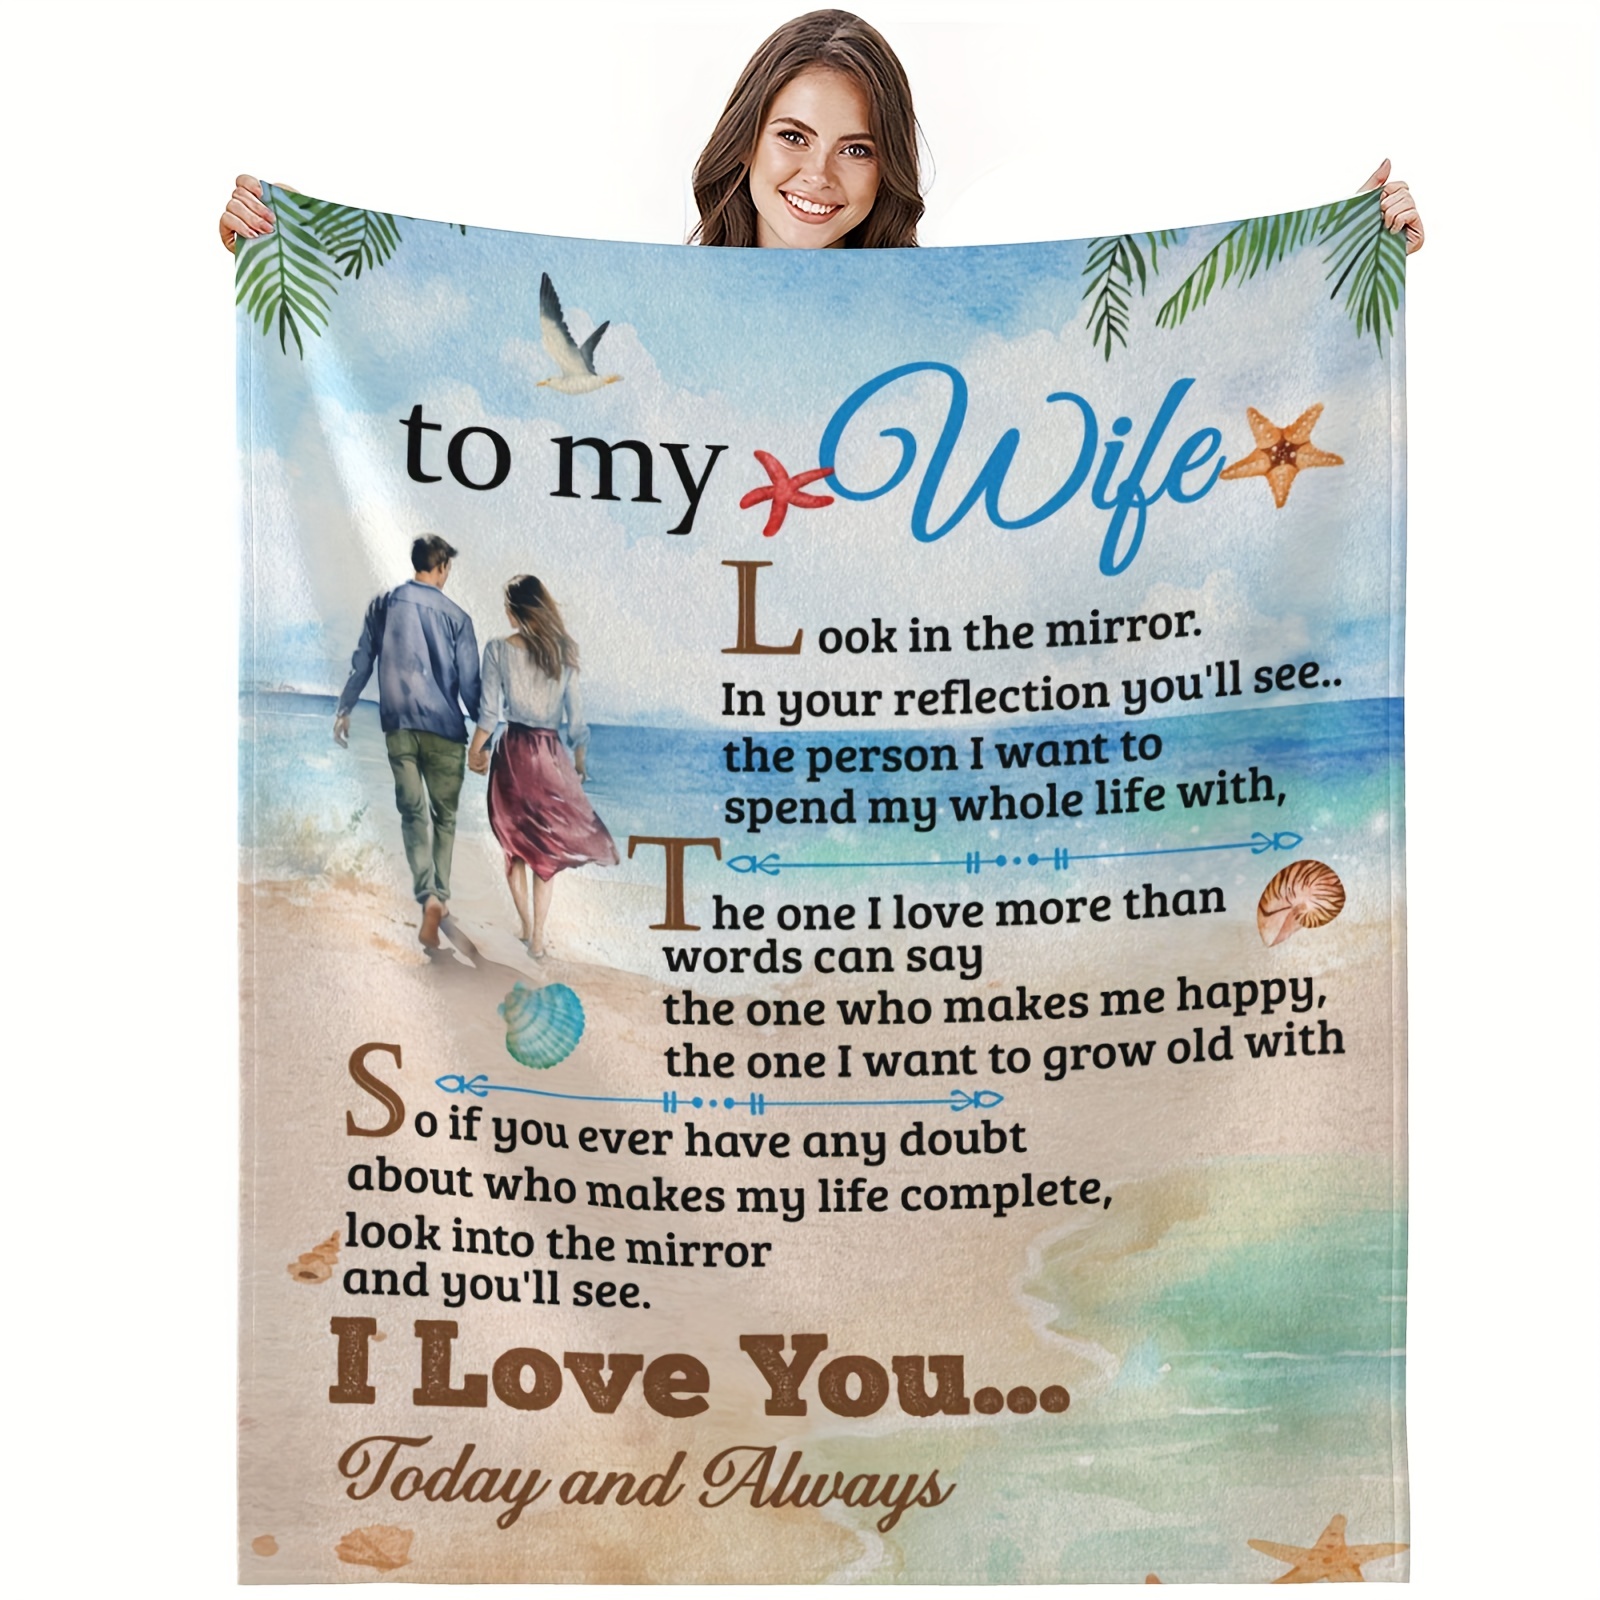 Gifts for Wife from Husband - Wife Gifts - Wedding Anniversary for Her,  Valentines Day Gifts for Wife, Wife Birthday Gift Ideas - I Love You Gifts  for